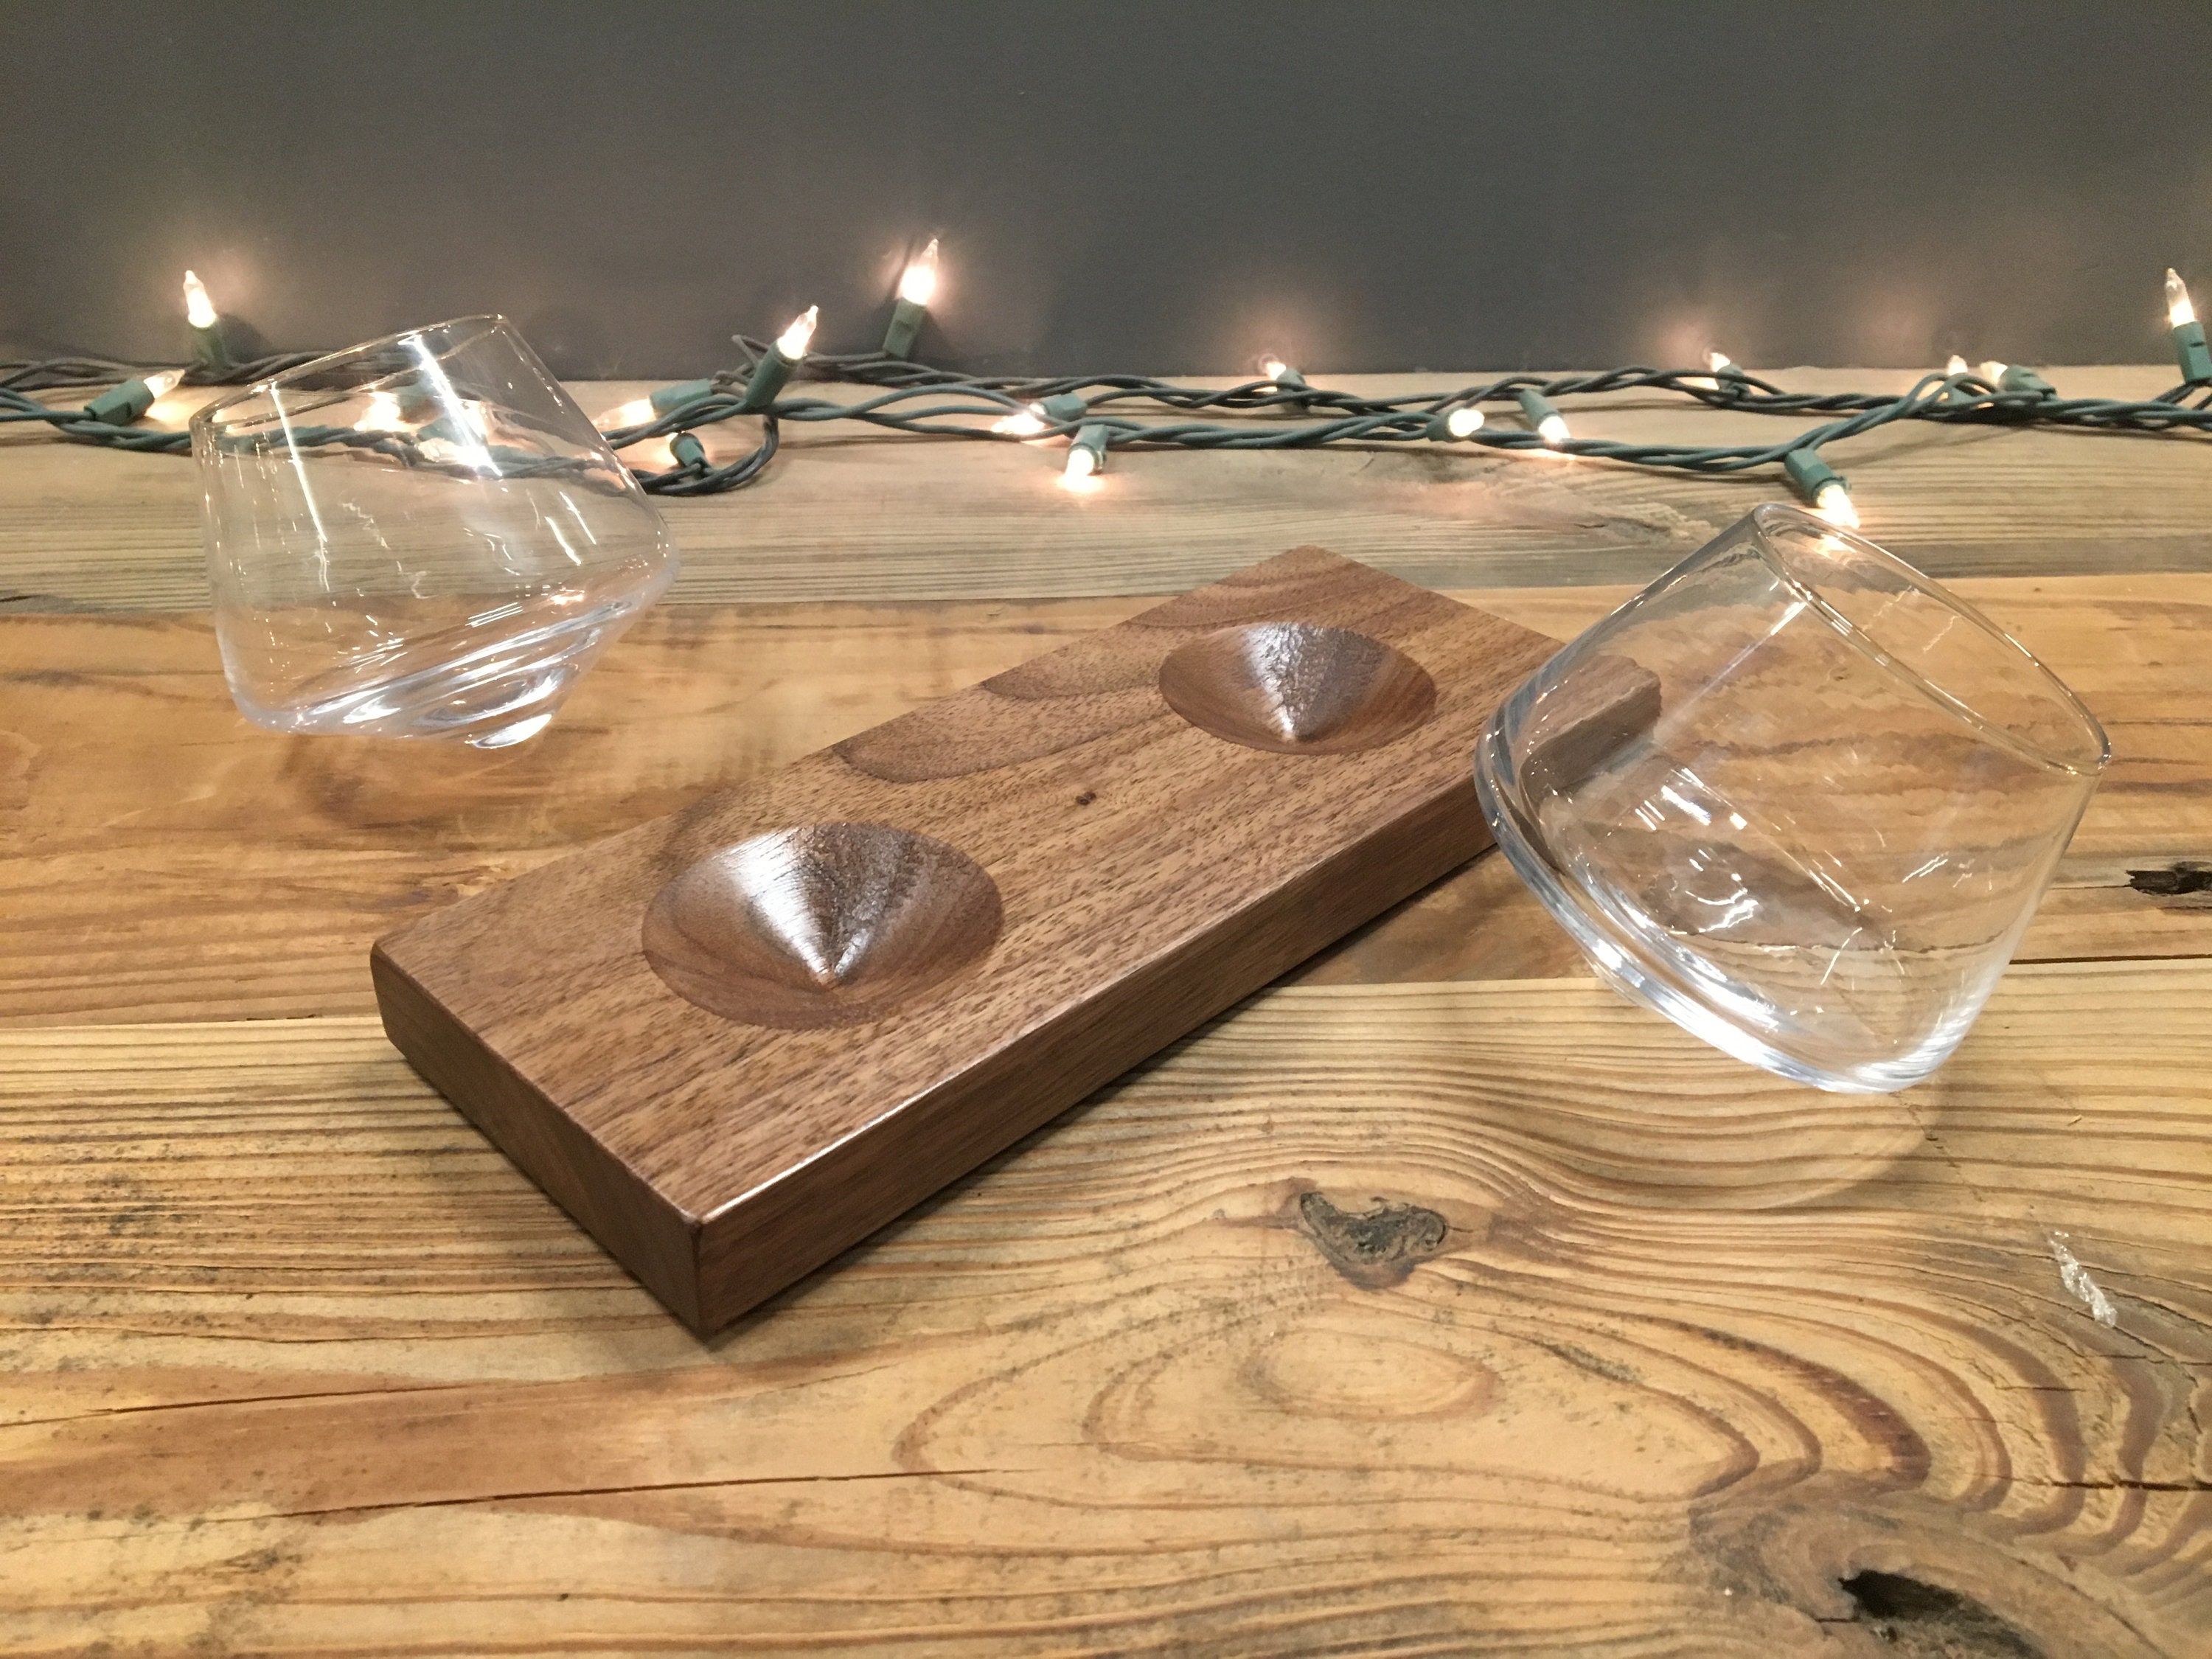 Tad 5oz Revolving Non-Spill Whiskey Glass with Wood Coaster.